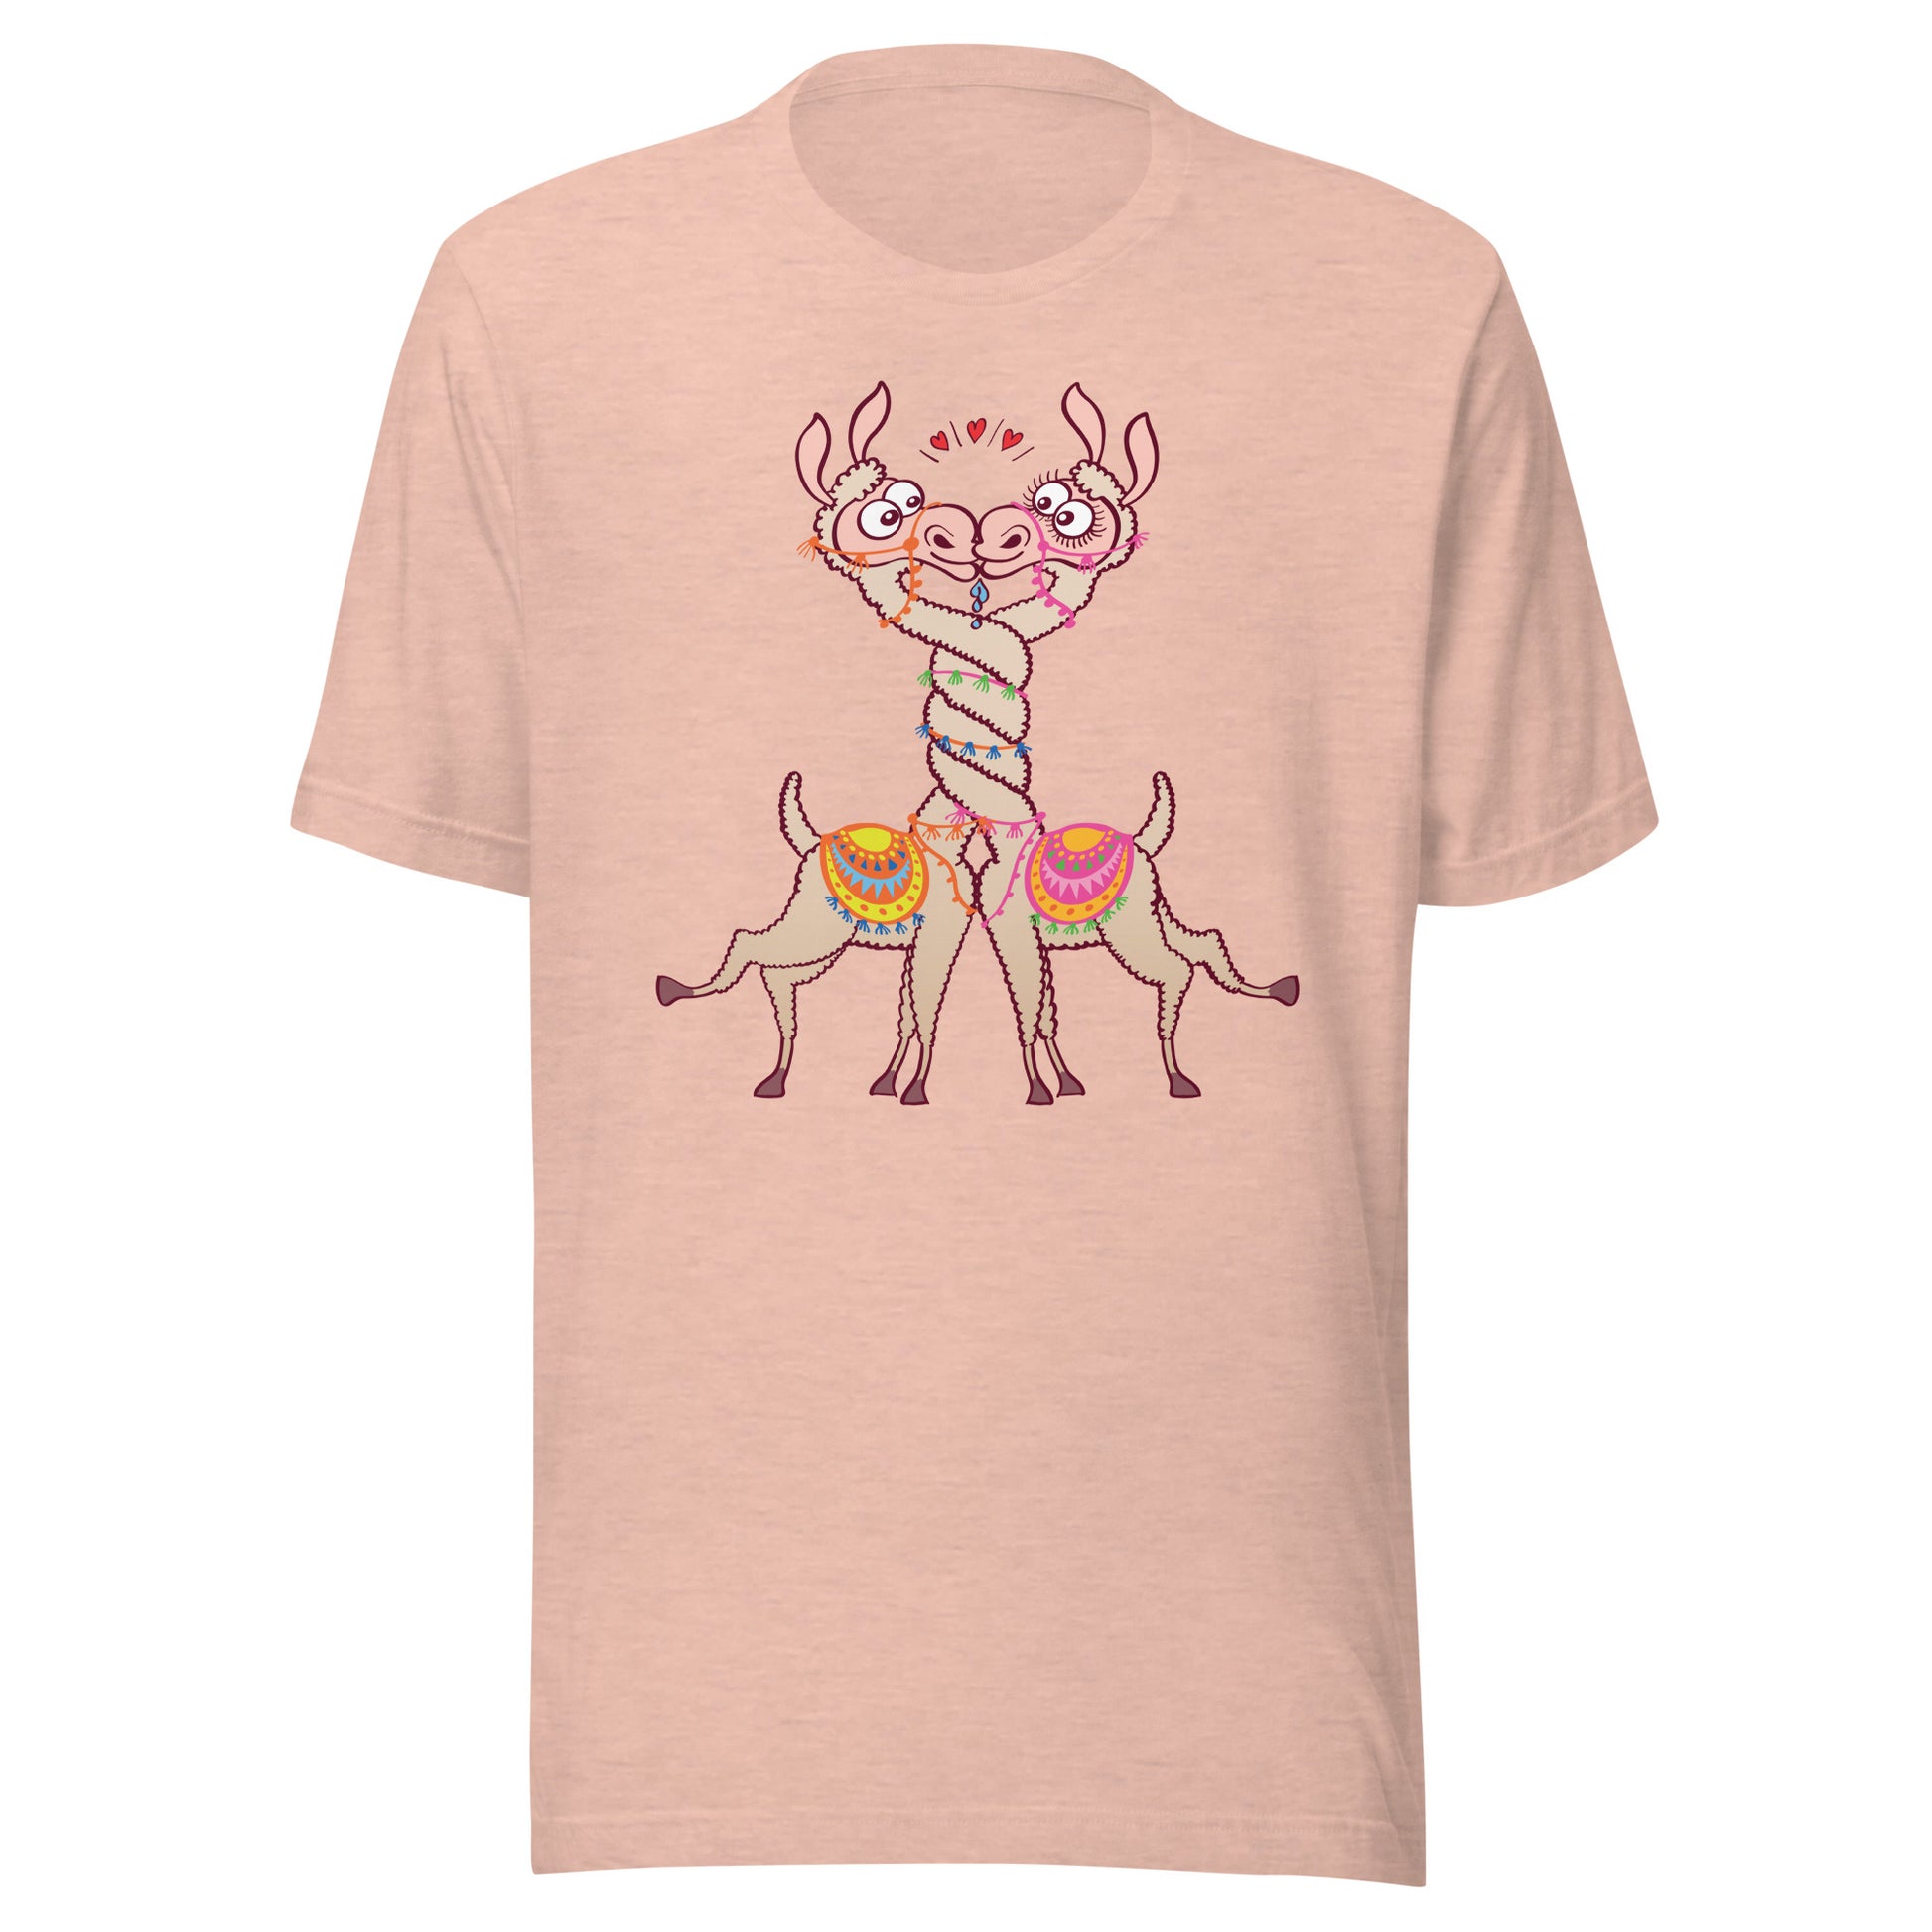 Cute llamas in love intertwining necks and kissing Unisex t-shirt. Heather prism peach color. Front view